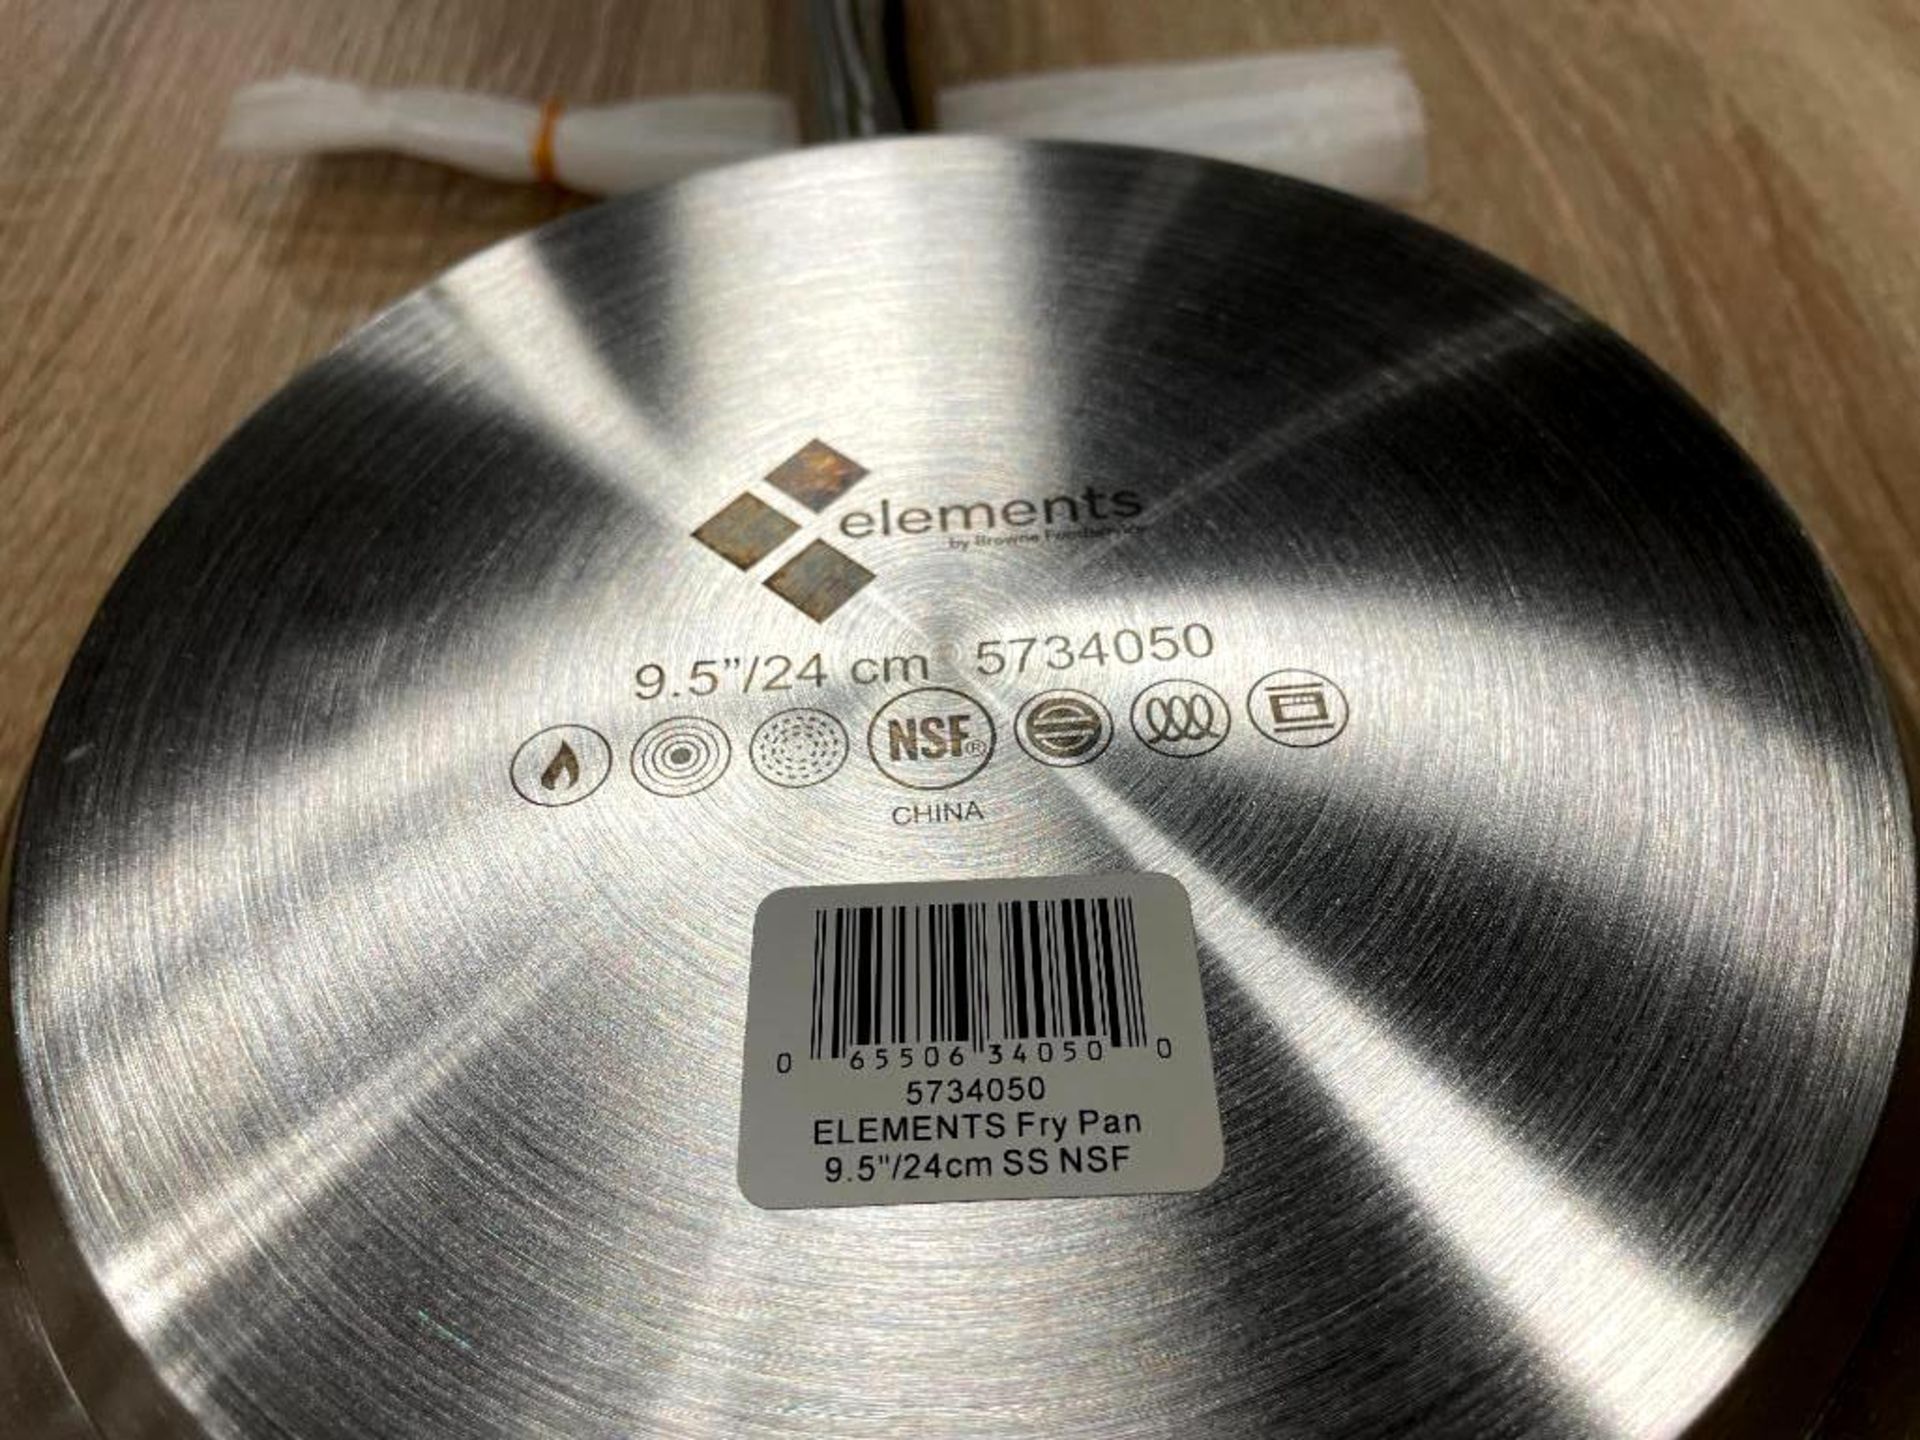 BROWNE ELEMENTS 9.5" STAINLESS STEEL FRY PAN - NEW - Image 3 of 3